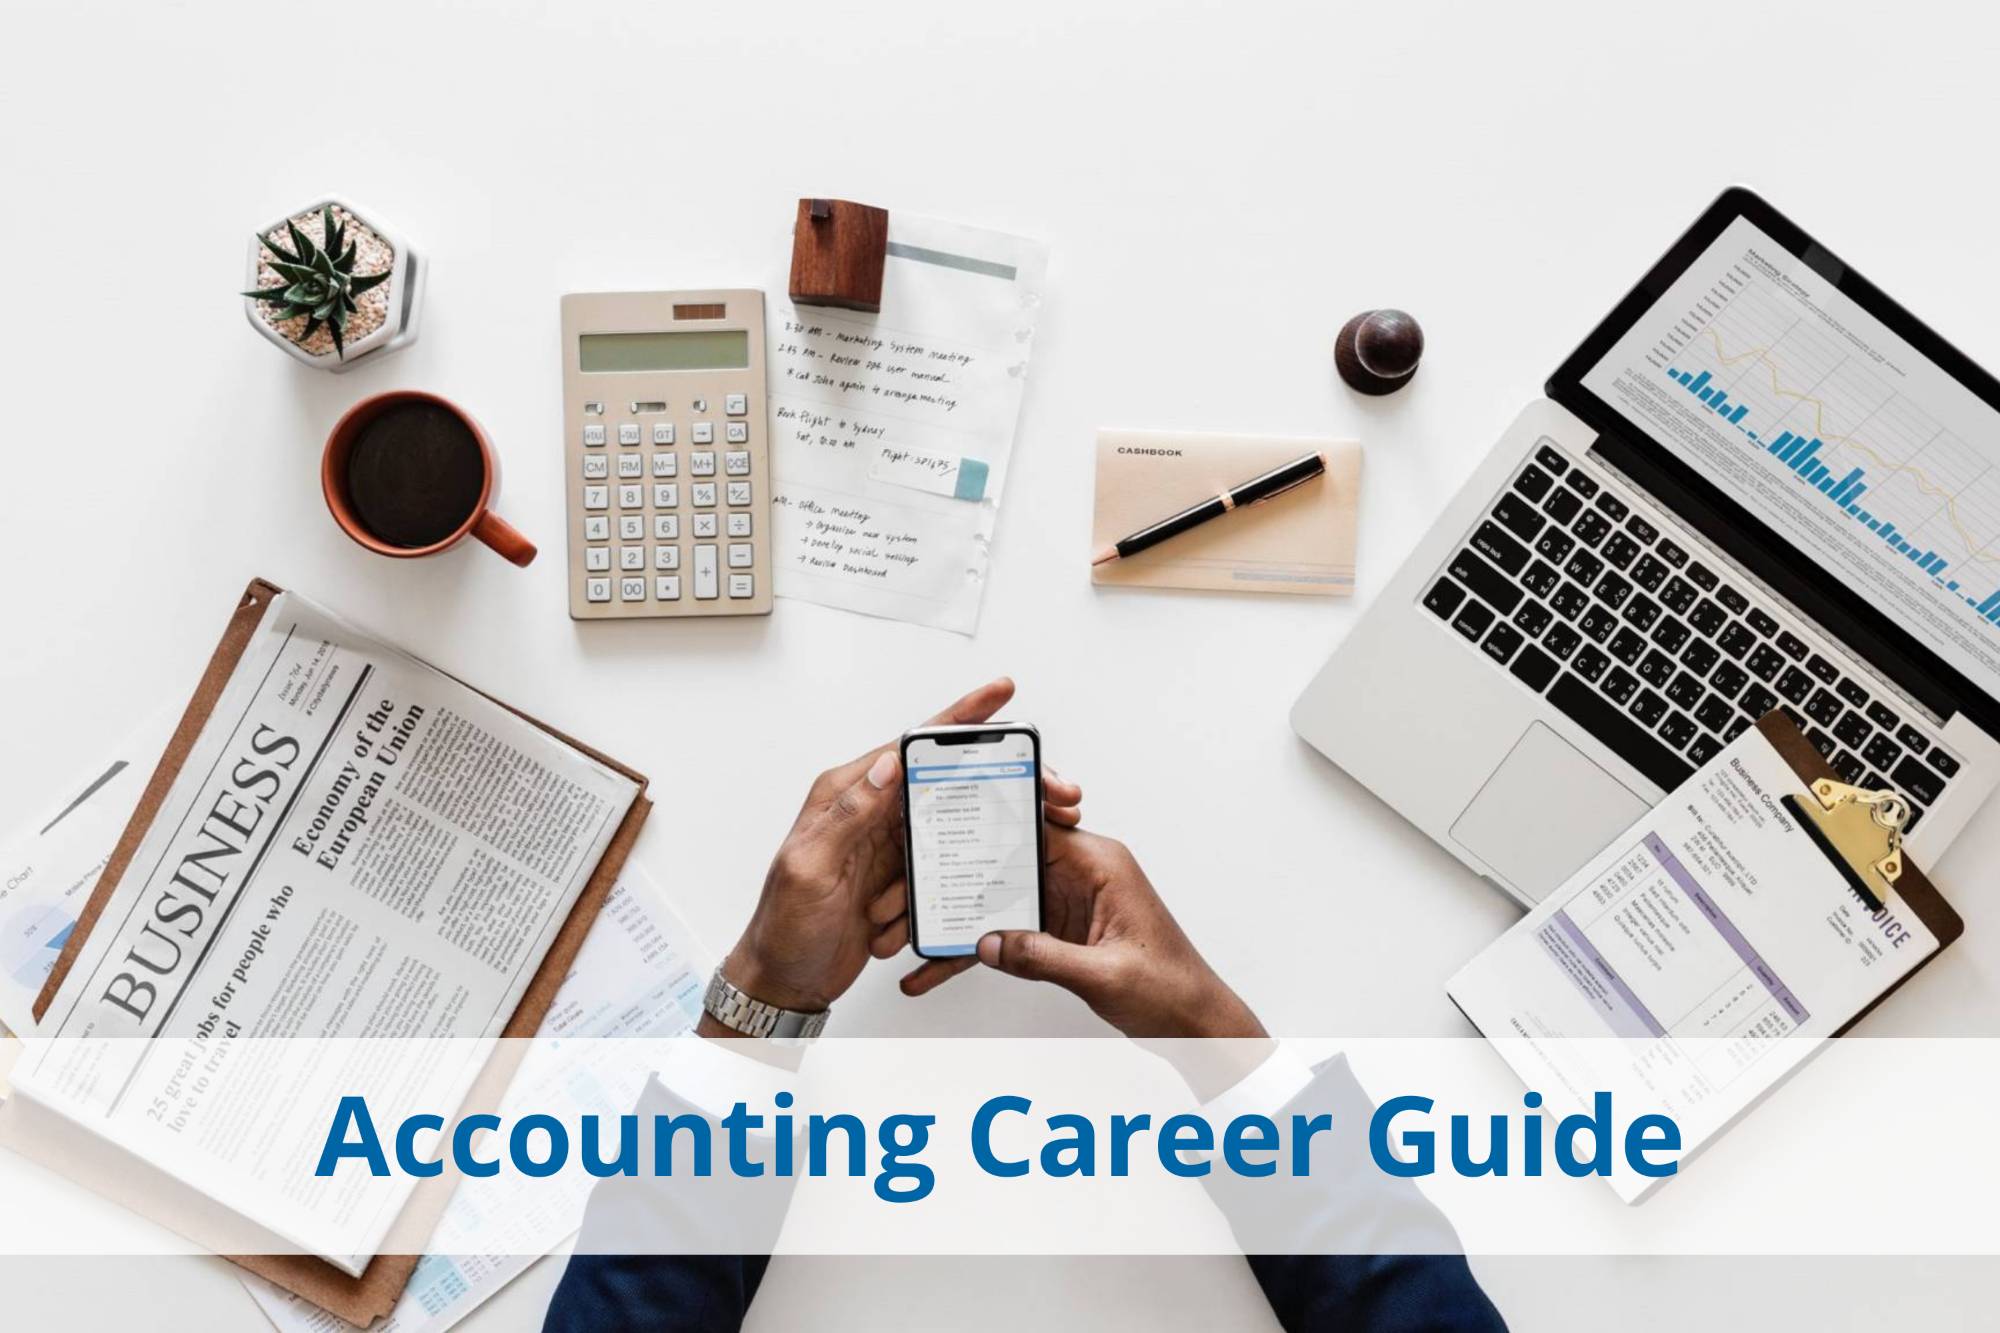 Accounting career guide